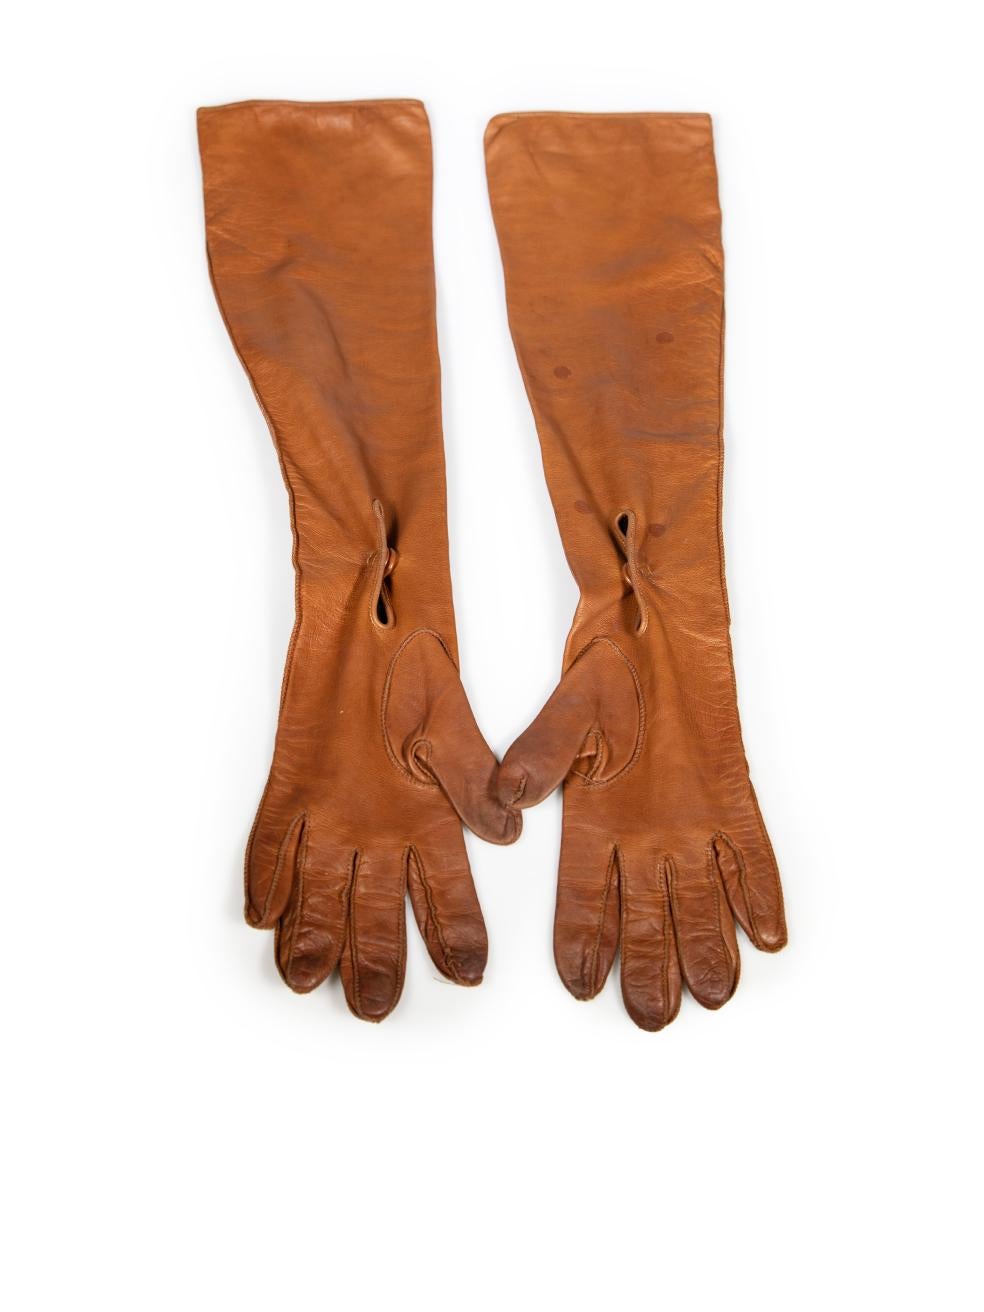 Prada Brown Leather Long Gloves In Good Condition For Sale In London, GB